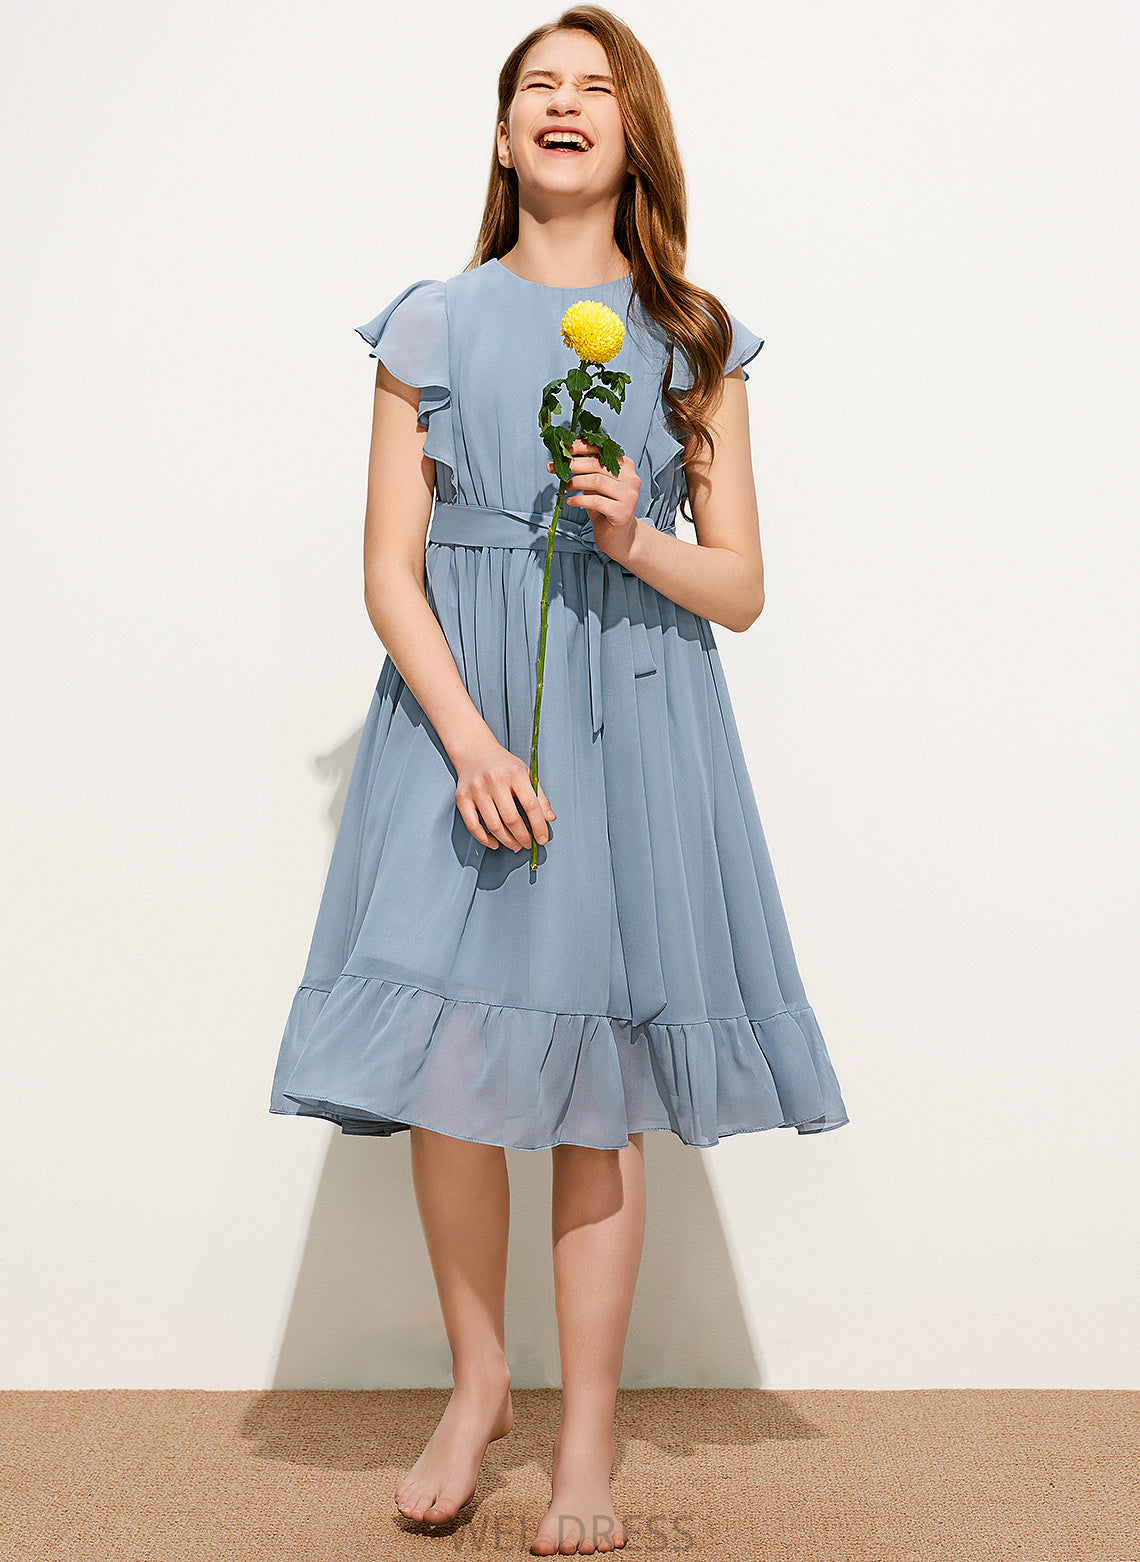 A-Line Carley Knee-Length Scoop Bow(s) Junior Bridesmaid Dresses With Chiffon Cascading Ruffles Neck